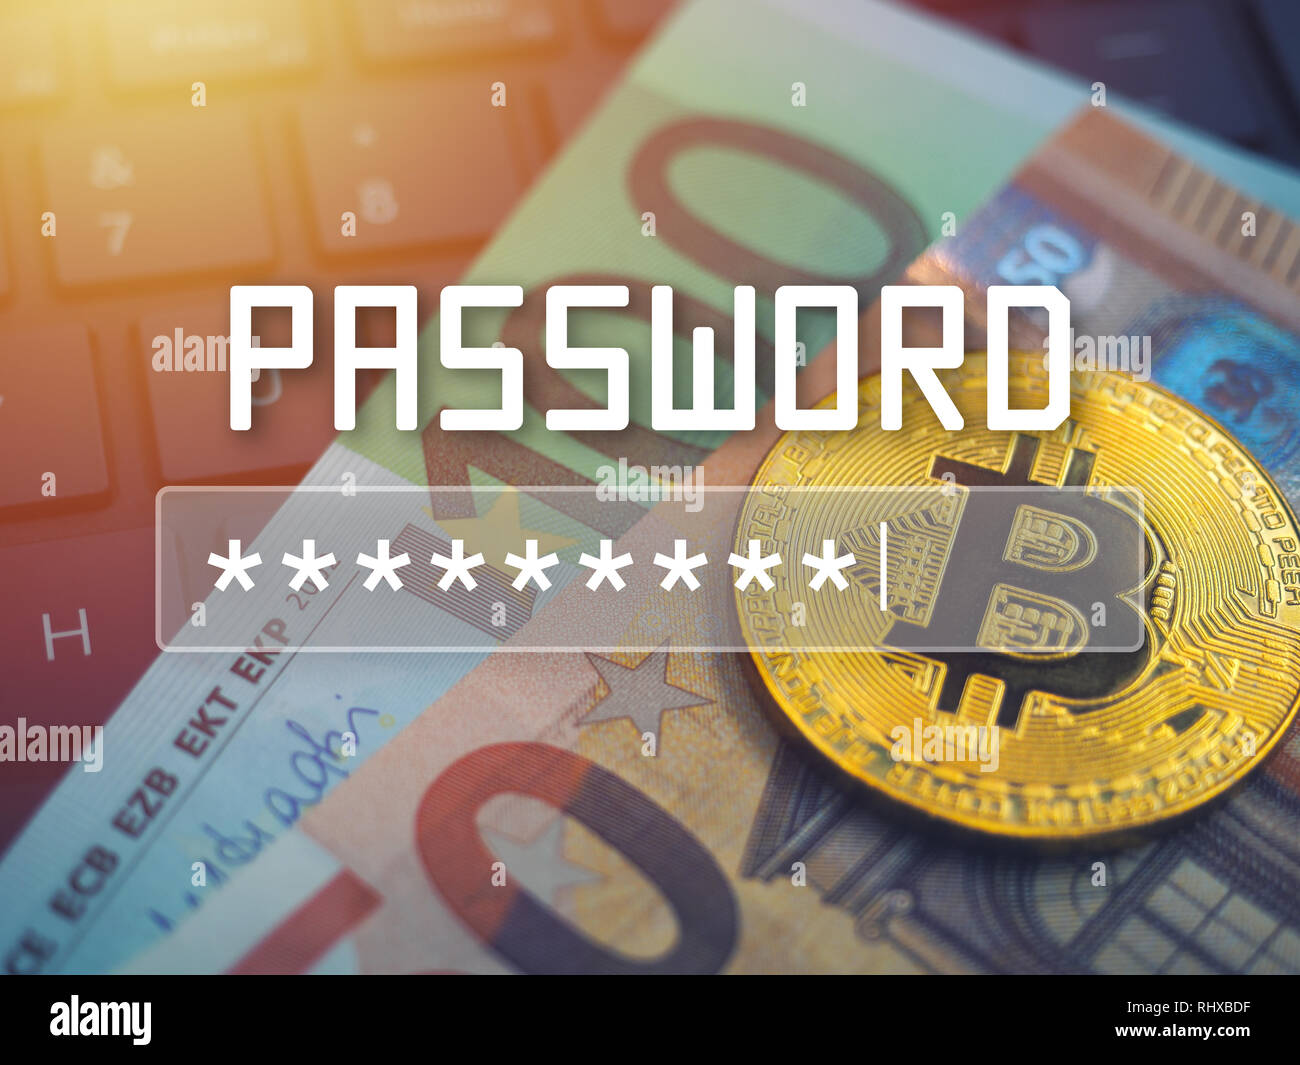 Password input on blurred background screen. Password protection against hackers. Stock Photo